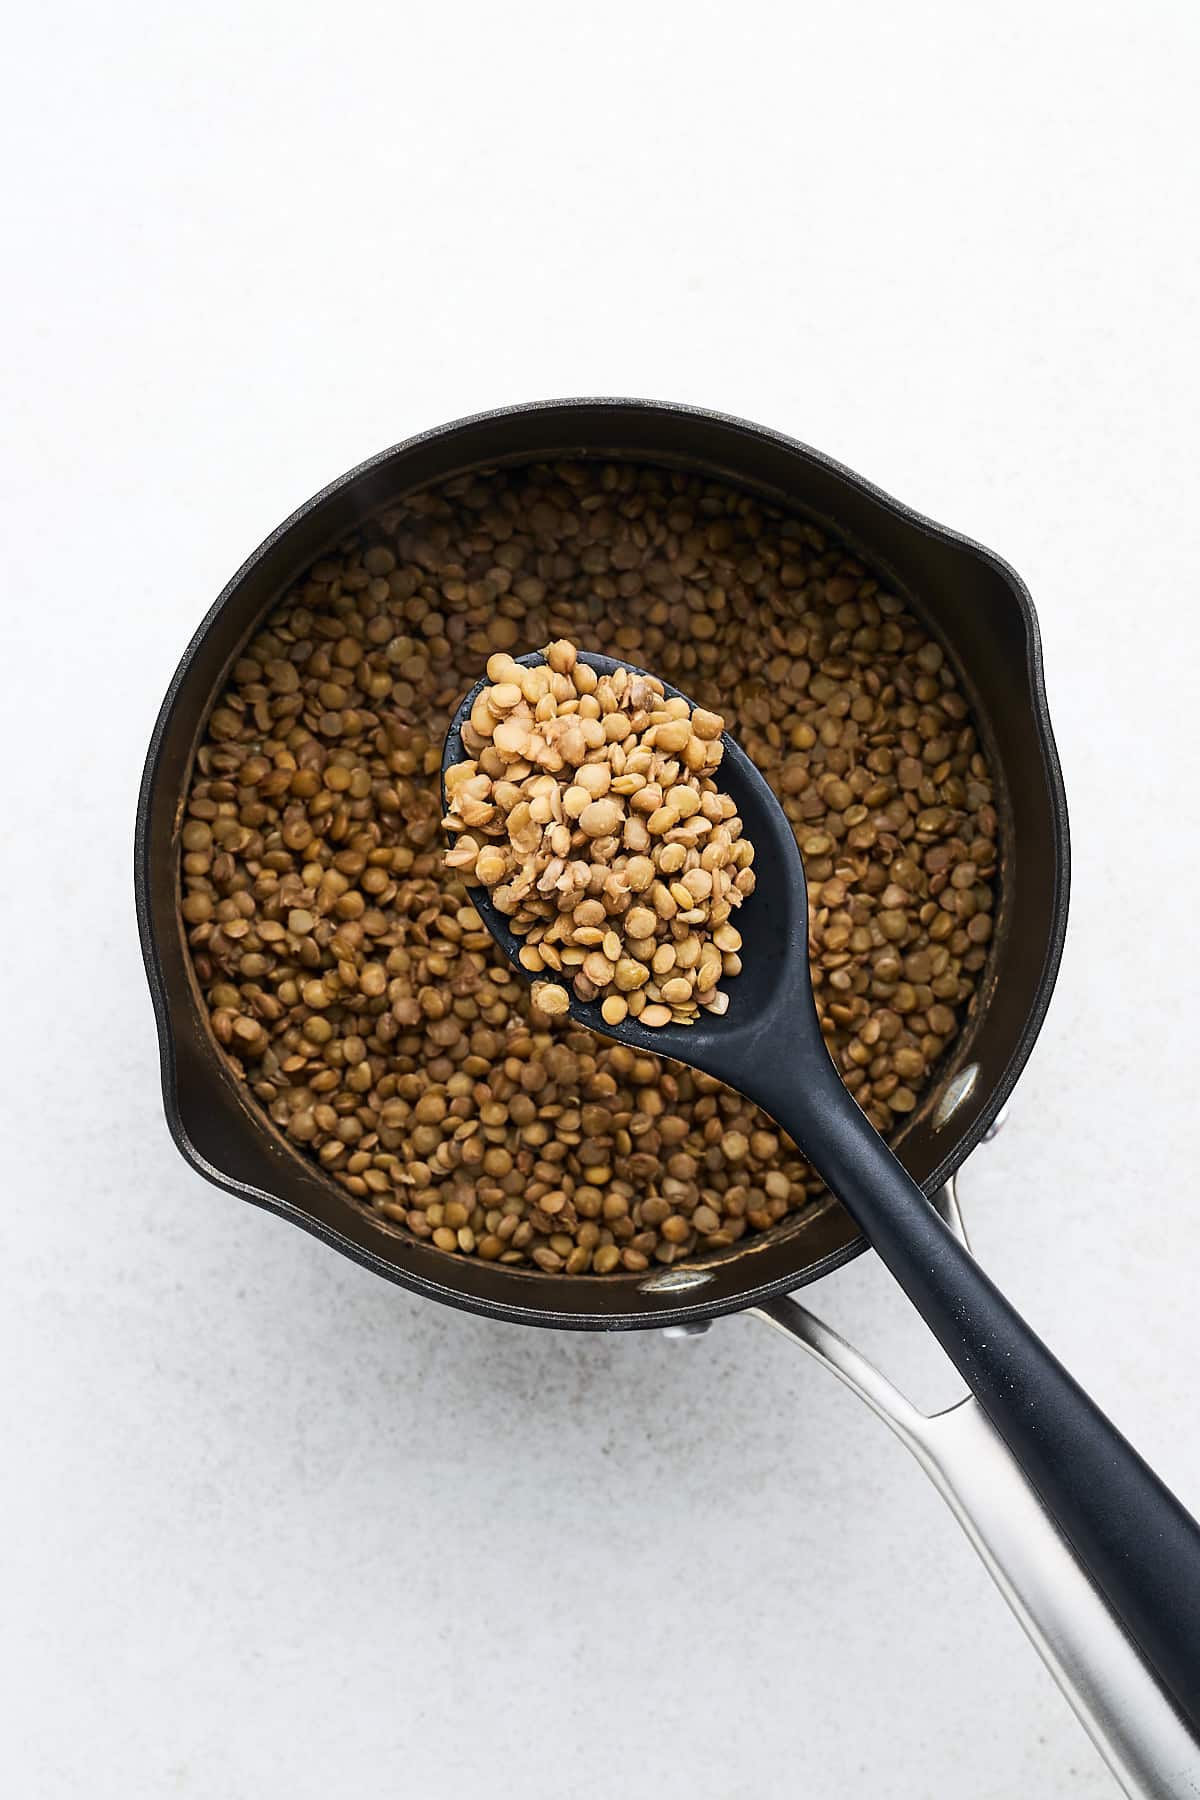 Cooked lentils on a serving spoon.